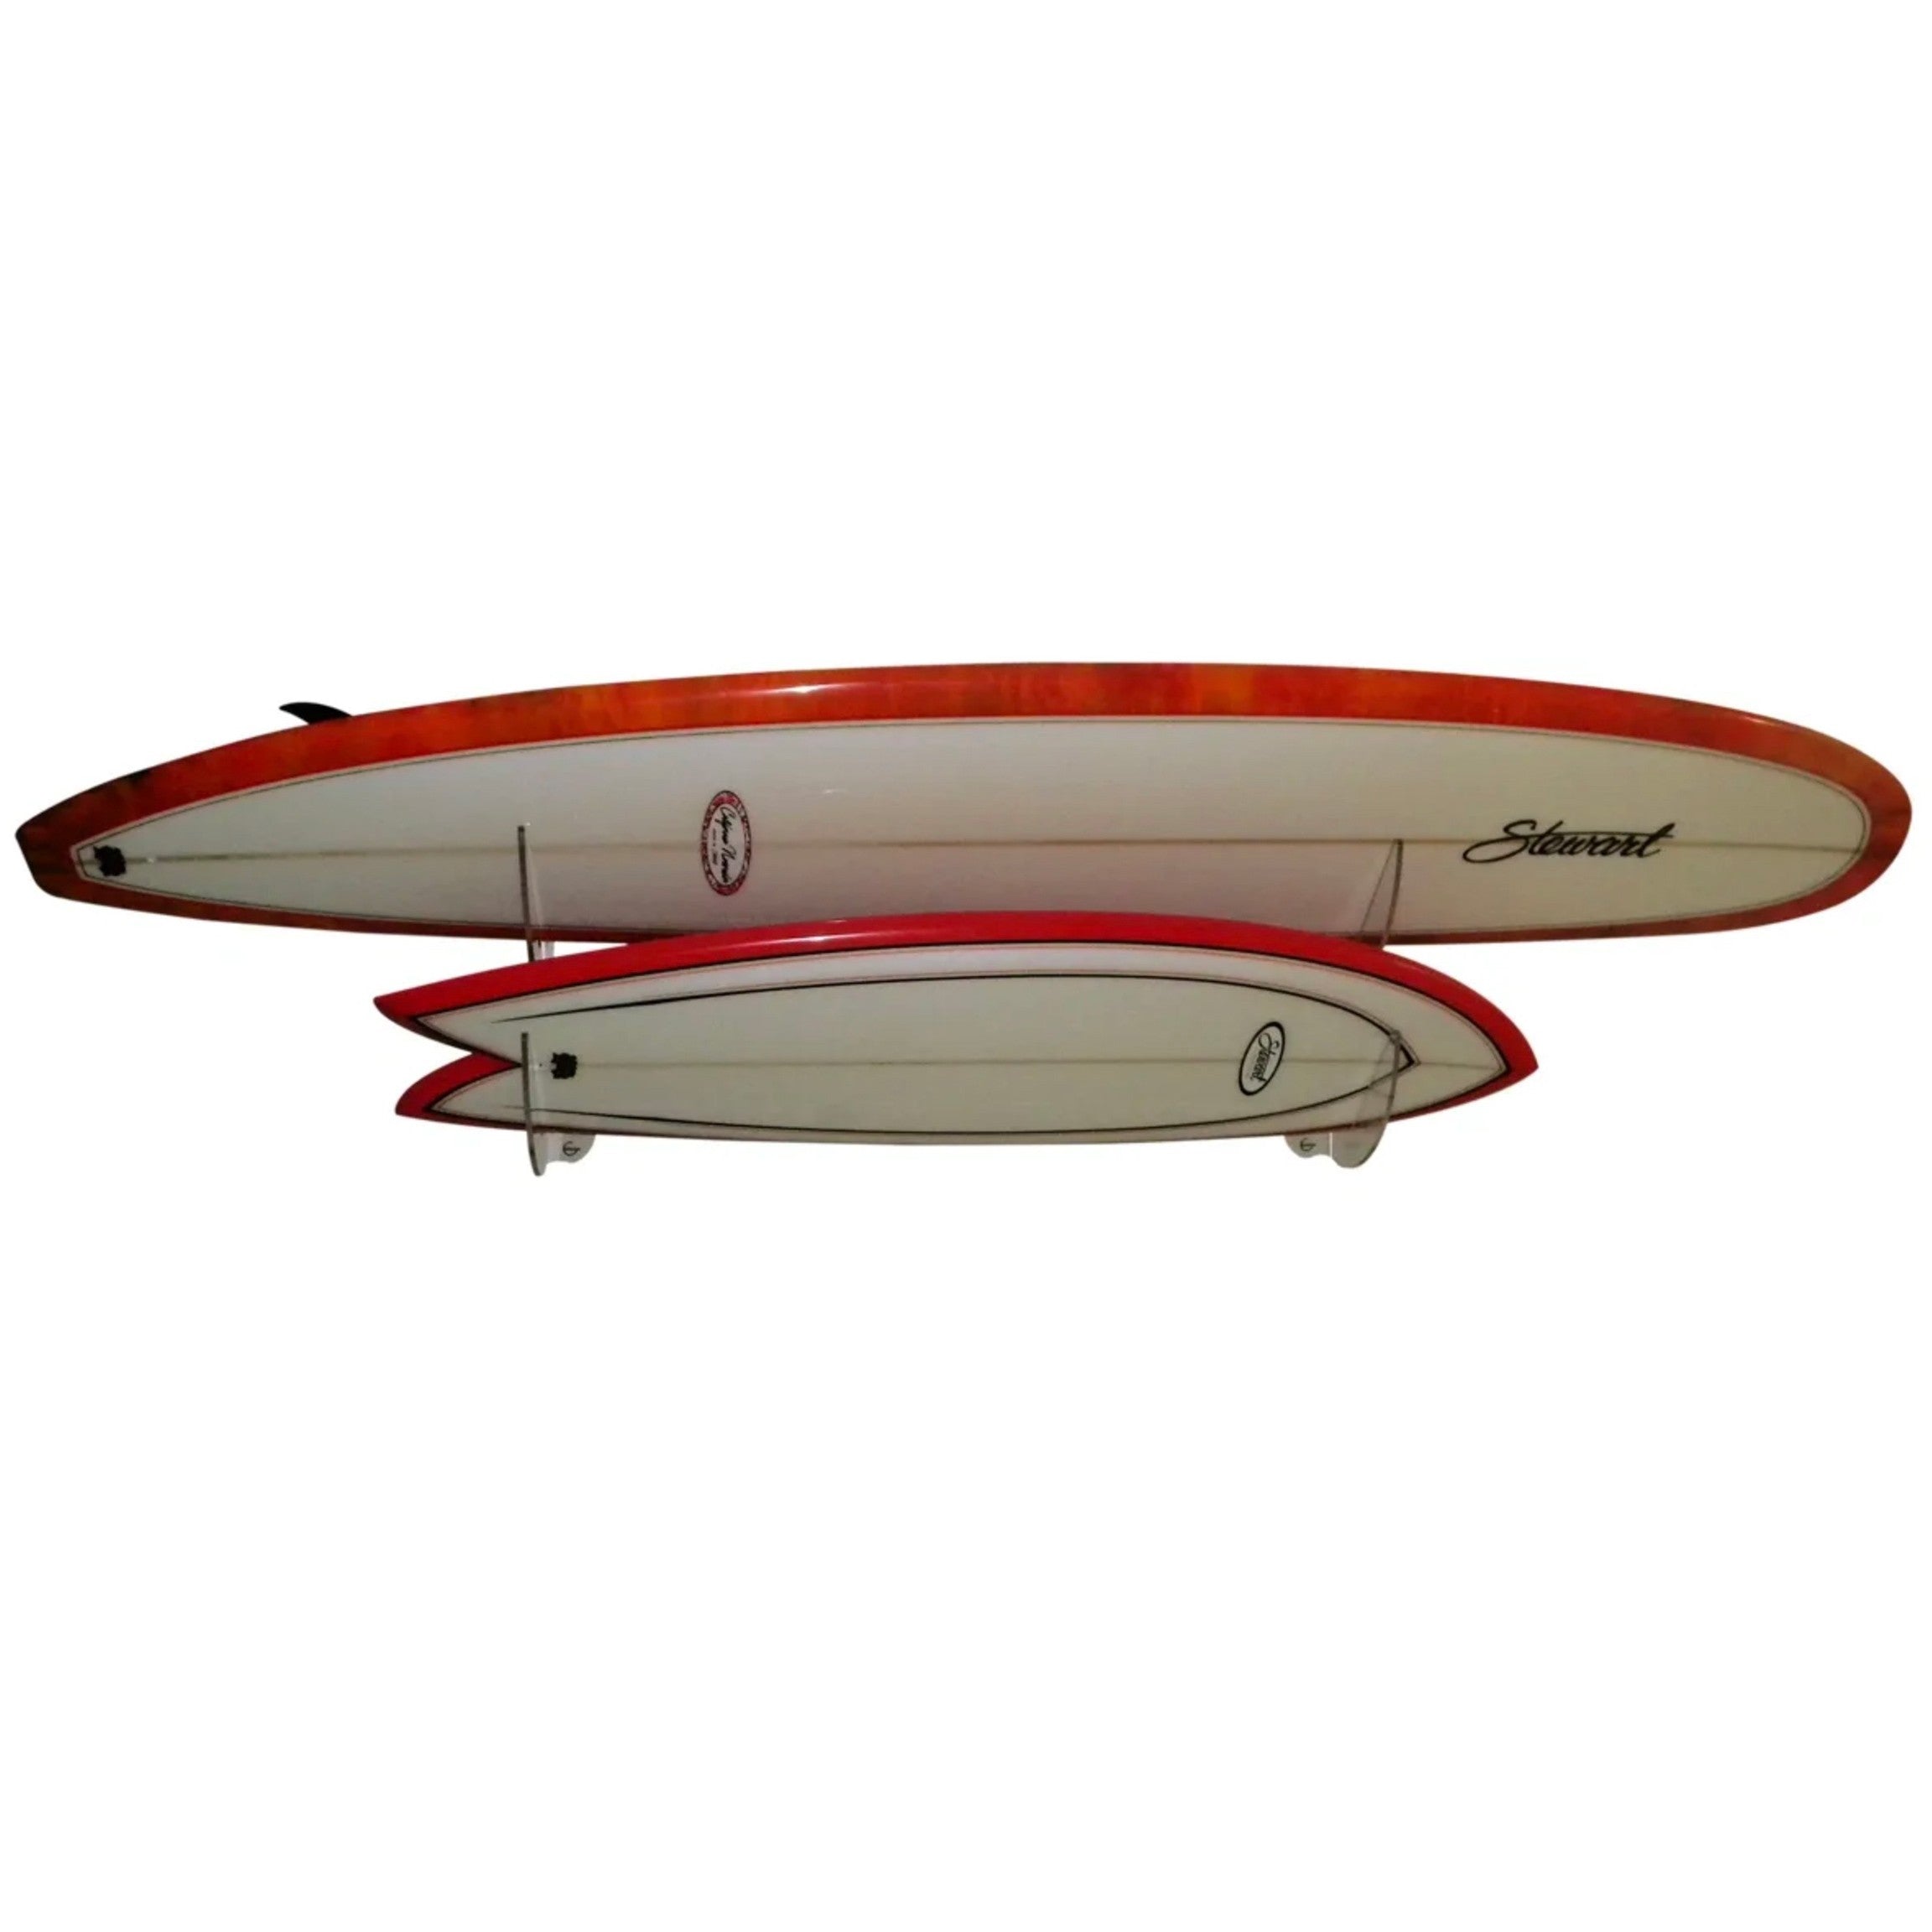 Double Support Mural Horizontal ON THE WALL 45° Shortboards, Longboards, SUP